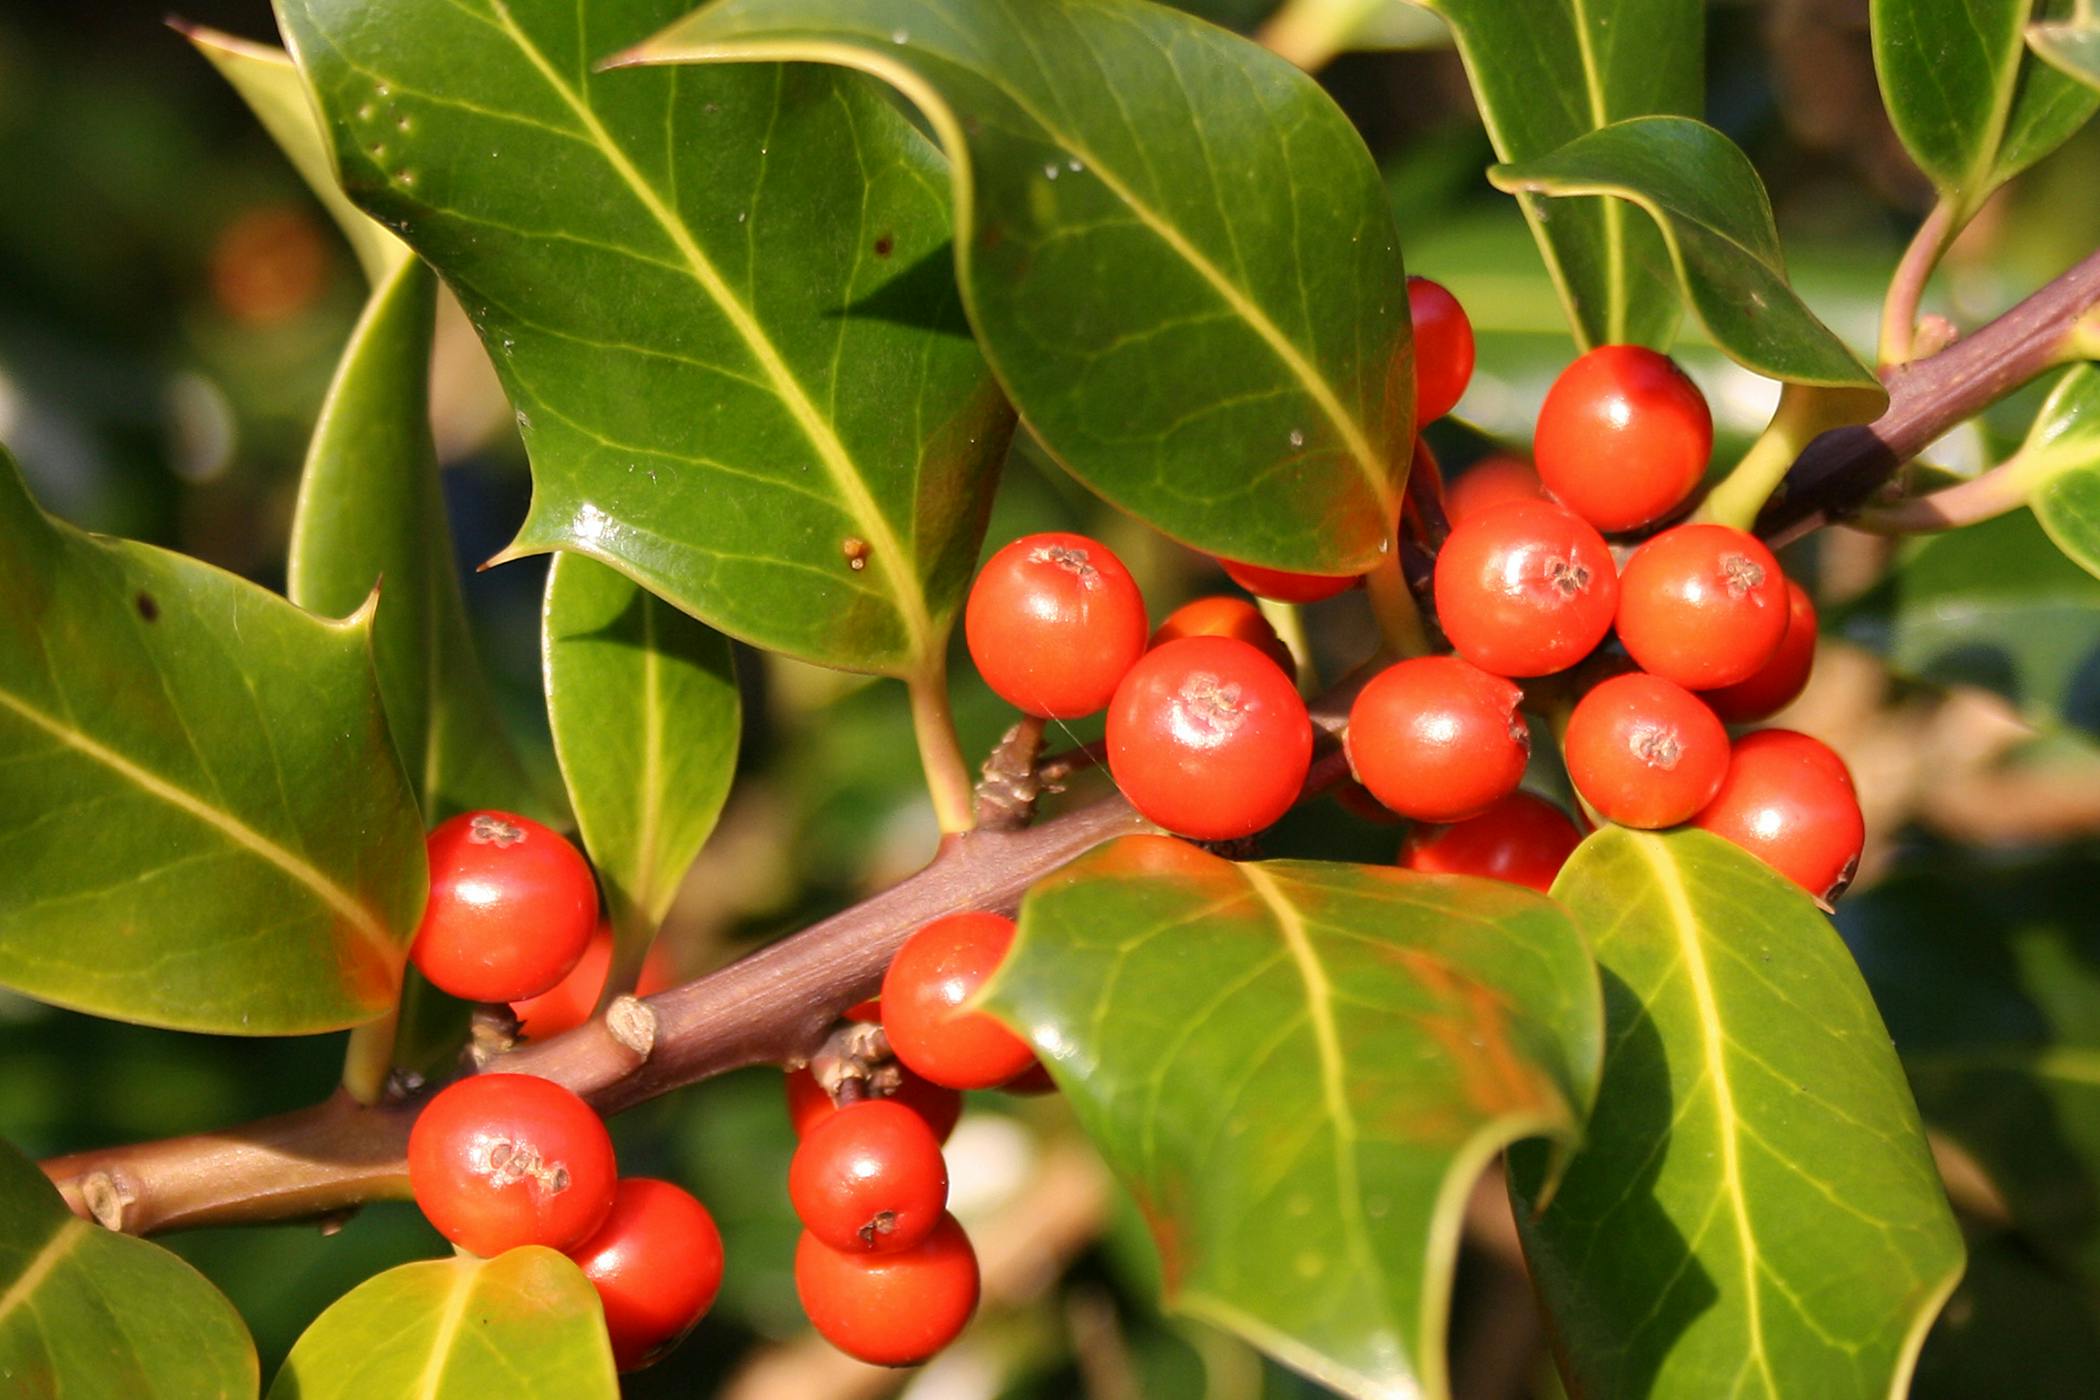 are holly bushes poisonous to dogs